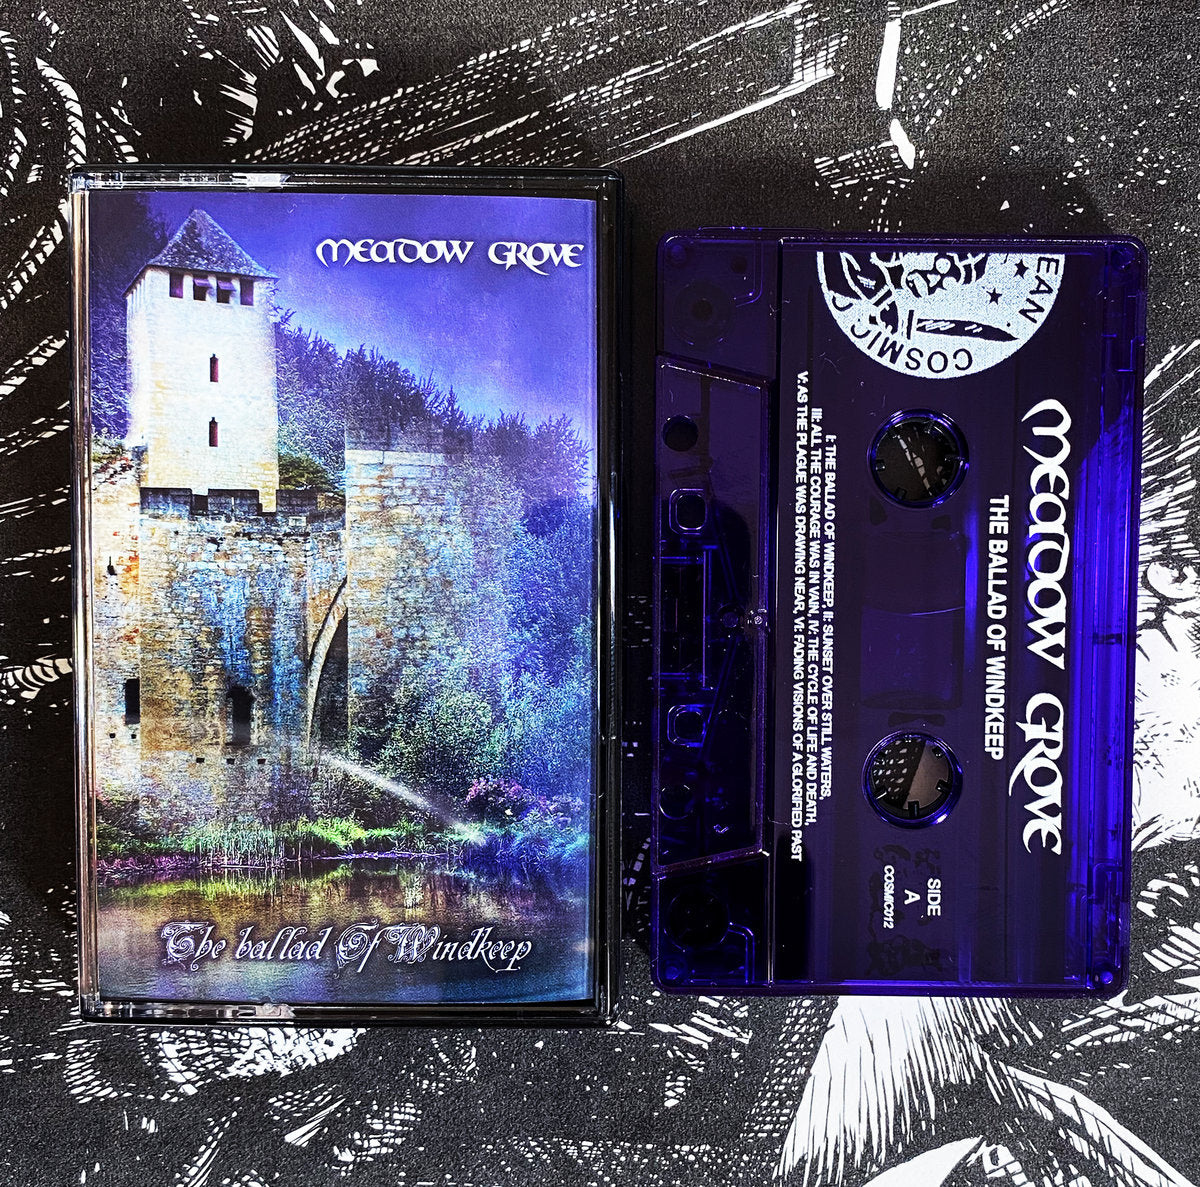 [SOLD OUT] MEADOW GROVE "The Ballad of Windkeep" cassette tape (lim.50)